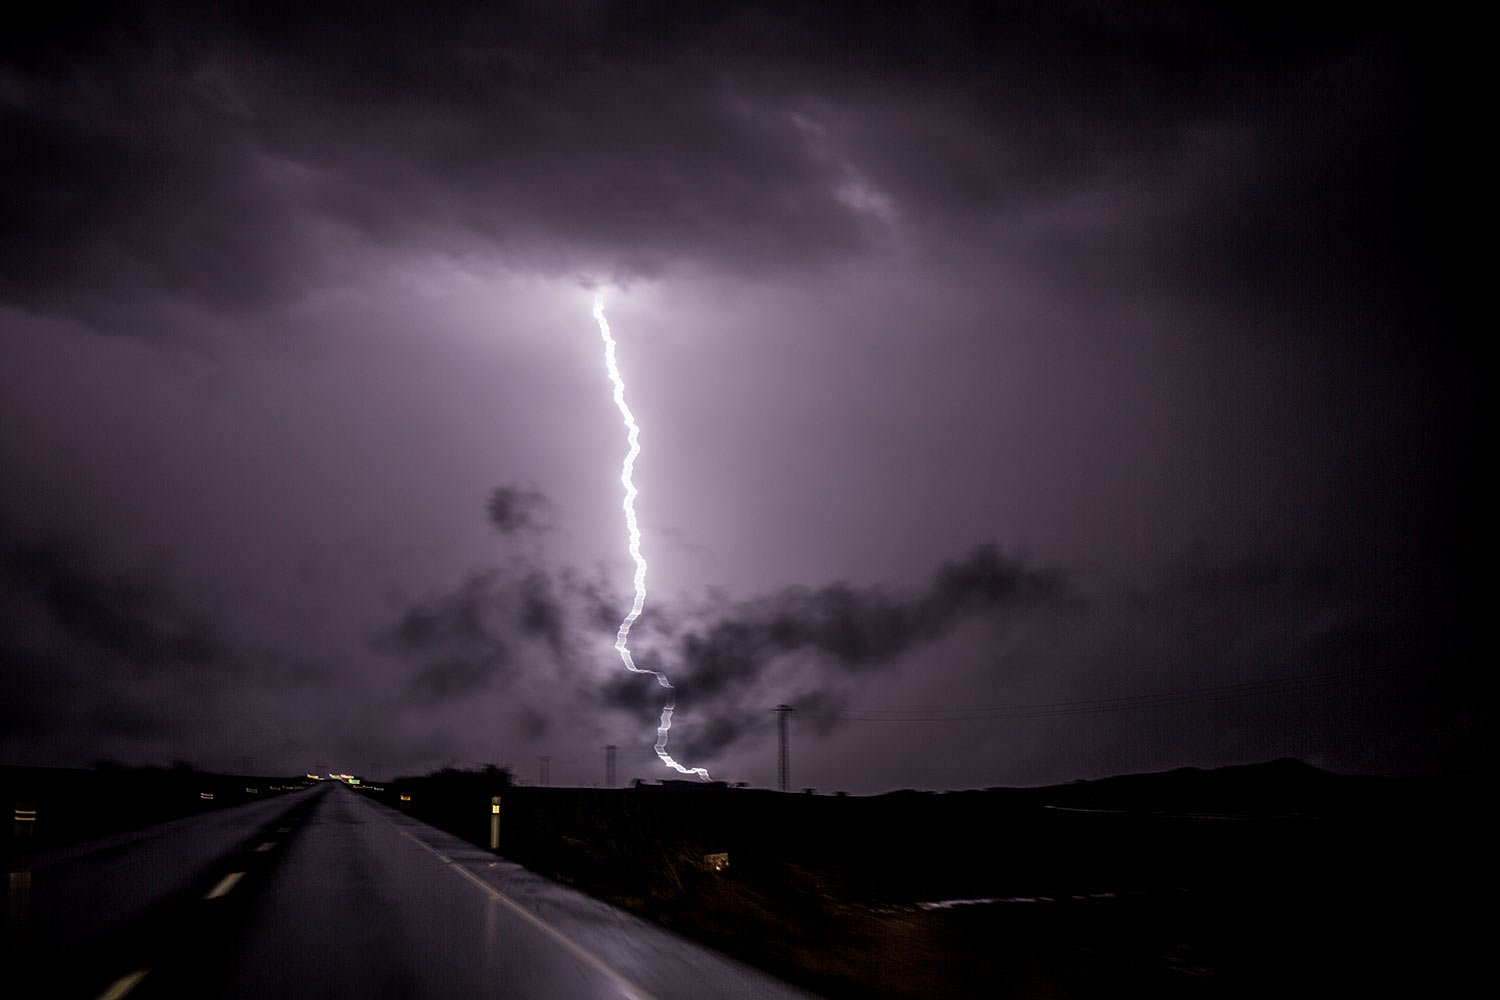  Lightning strikes ground on the outskirts of the village of Campillos, Spain, where heavy rain and floods caused much damage and the death of a firefighter according to Spanish authorities, Oct. 21 2018.  (AP Photo/Javier Fergo) 